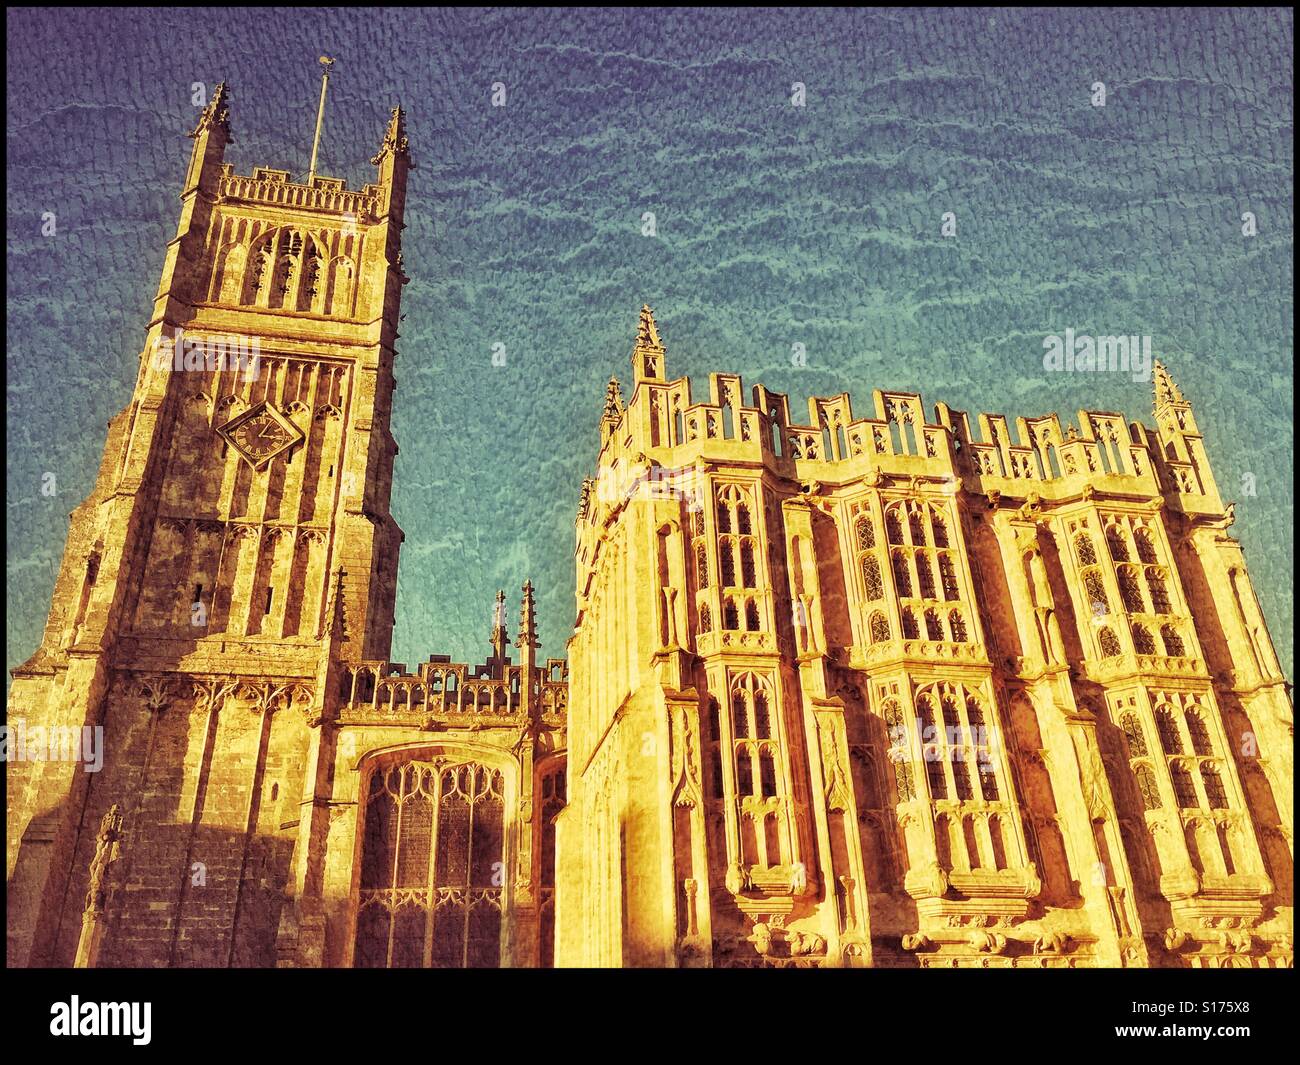 A grunge effect image of the St. John Baptist Anglican Church in Cirencester, Gloucestershire, England. To the left is the Bell Tower & on the right is The Town Hall. Photo Credit - © COLIN HOSKINS. Stock Photo